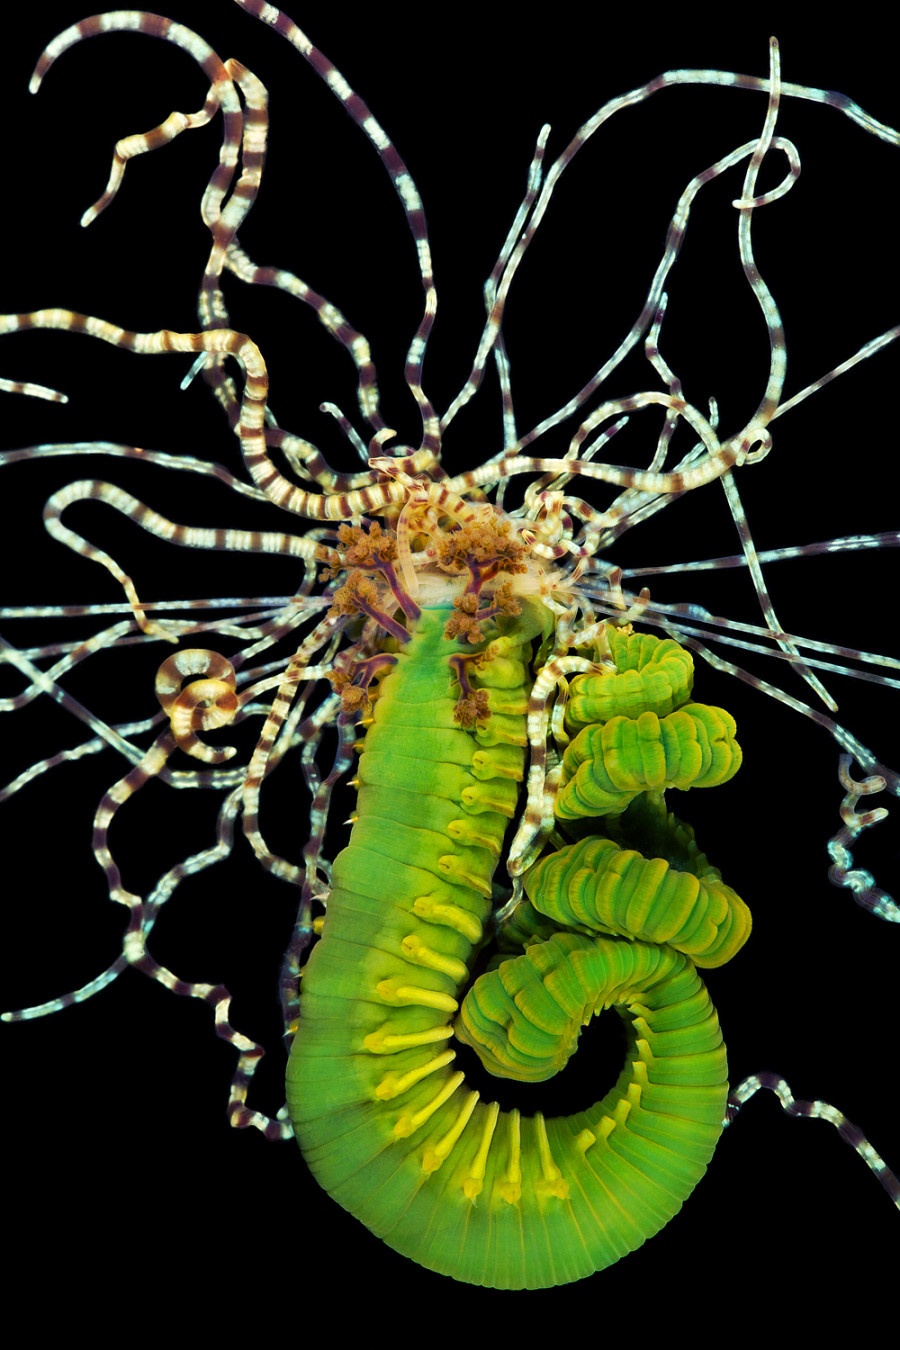 bizarre photos of underwater worms prove nature can outdo your wildest fantasies